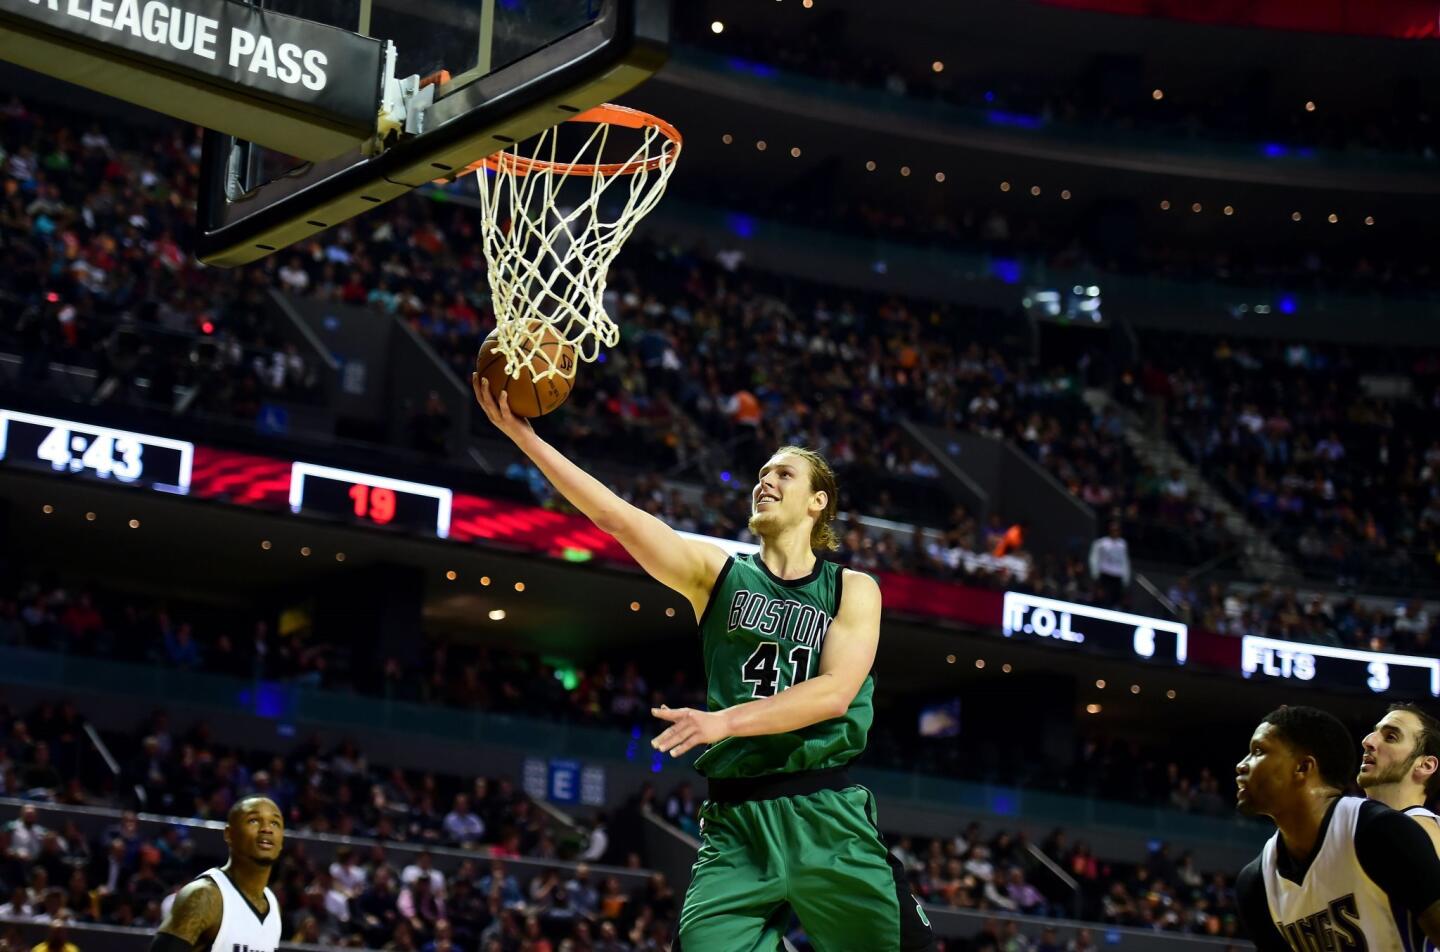 Boston Celtics' Kelly Olynyk (C) scores against the Sacramento Kings during a basketball match of the NBA Global Games at the Mexico City Arena, on December 03, 2015, in Mexico City.